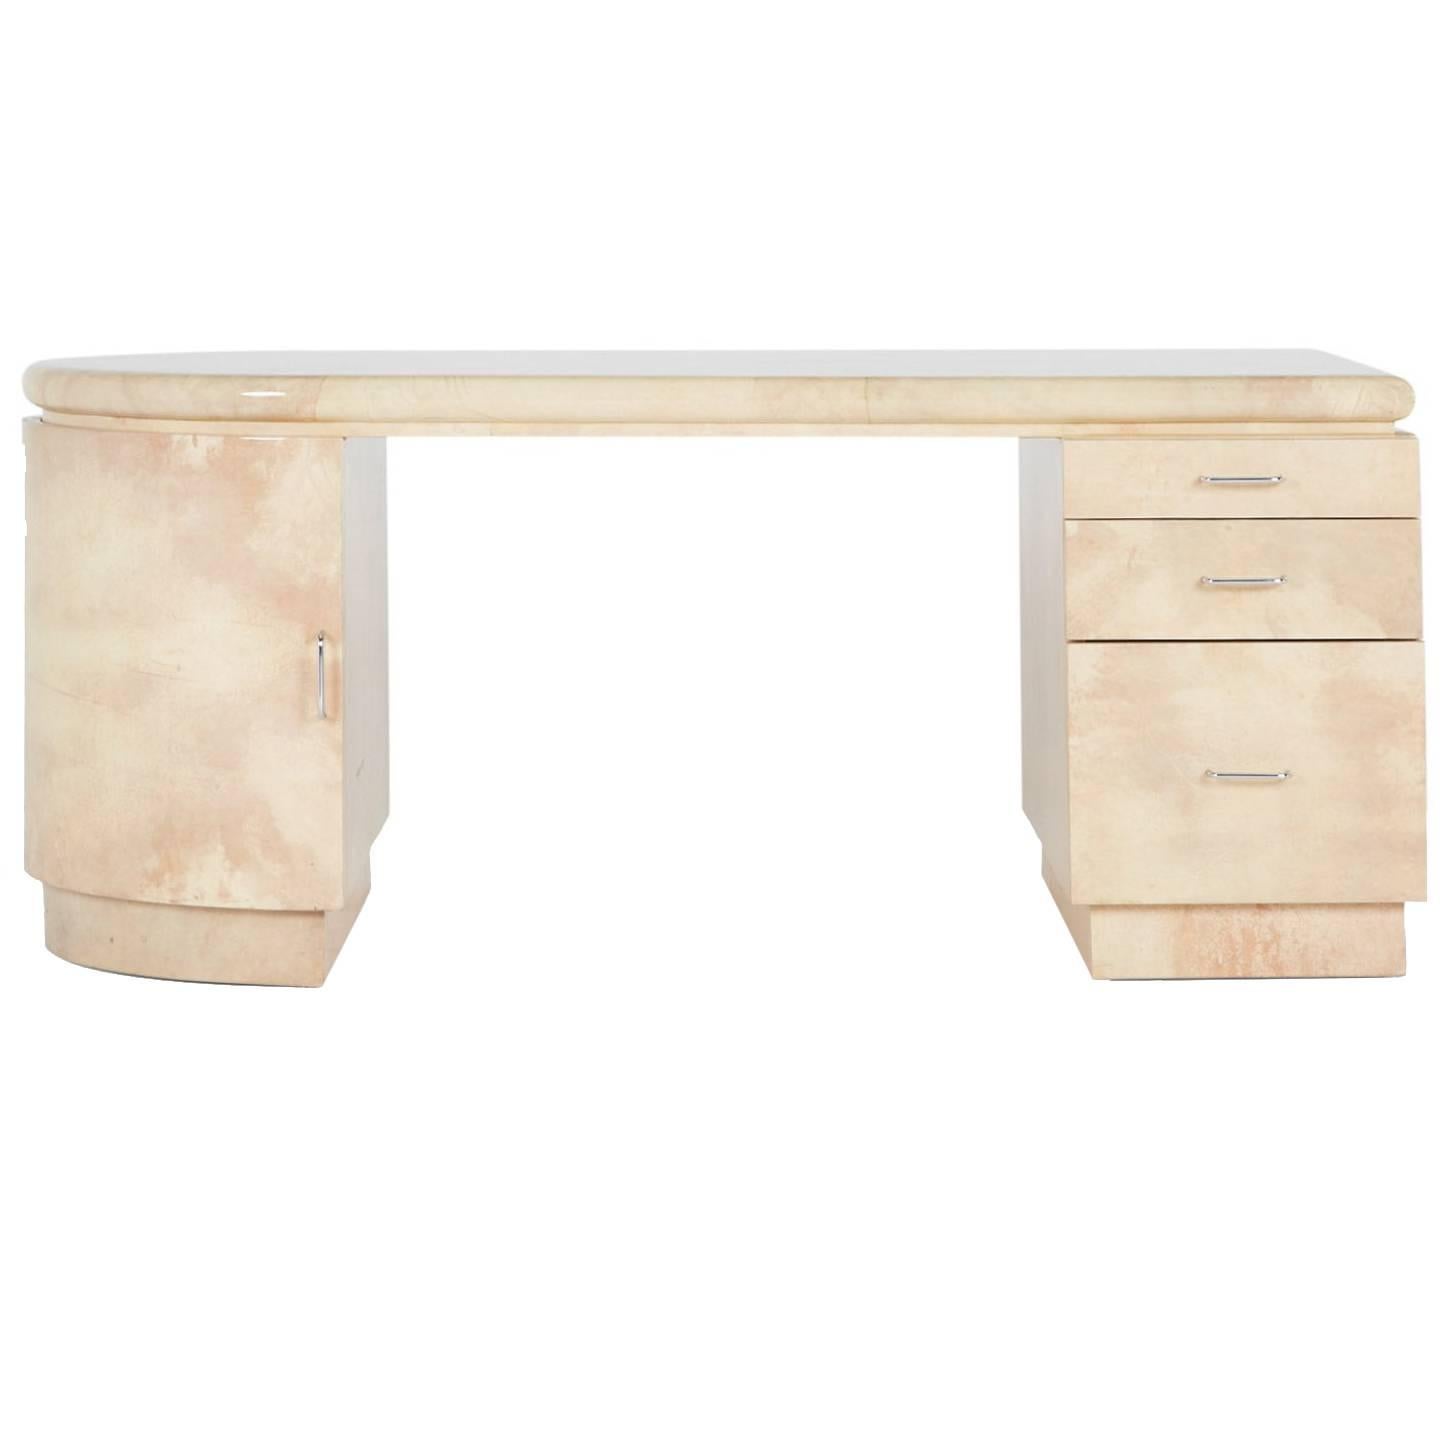 A large, exquisite lacquered goatskin desk created by iconic designer and Palm Springs resident Steve Chase. Luxurious and down-right gorgeous, this is the quintessential desk for a Chief Designer's office. 

Acquired from a Laguna Beach private